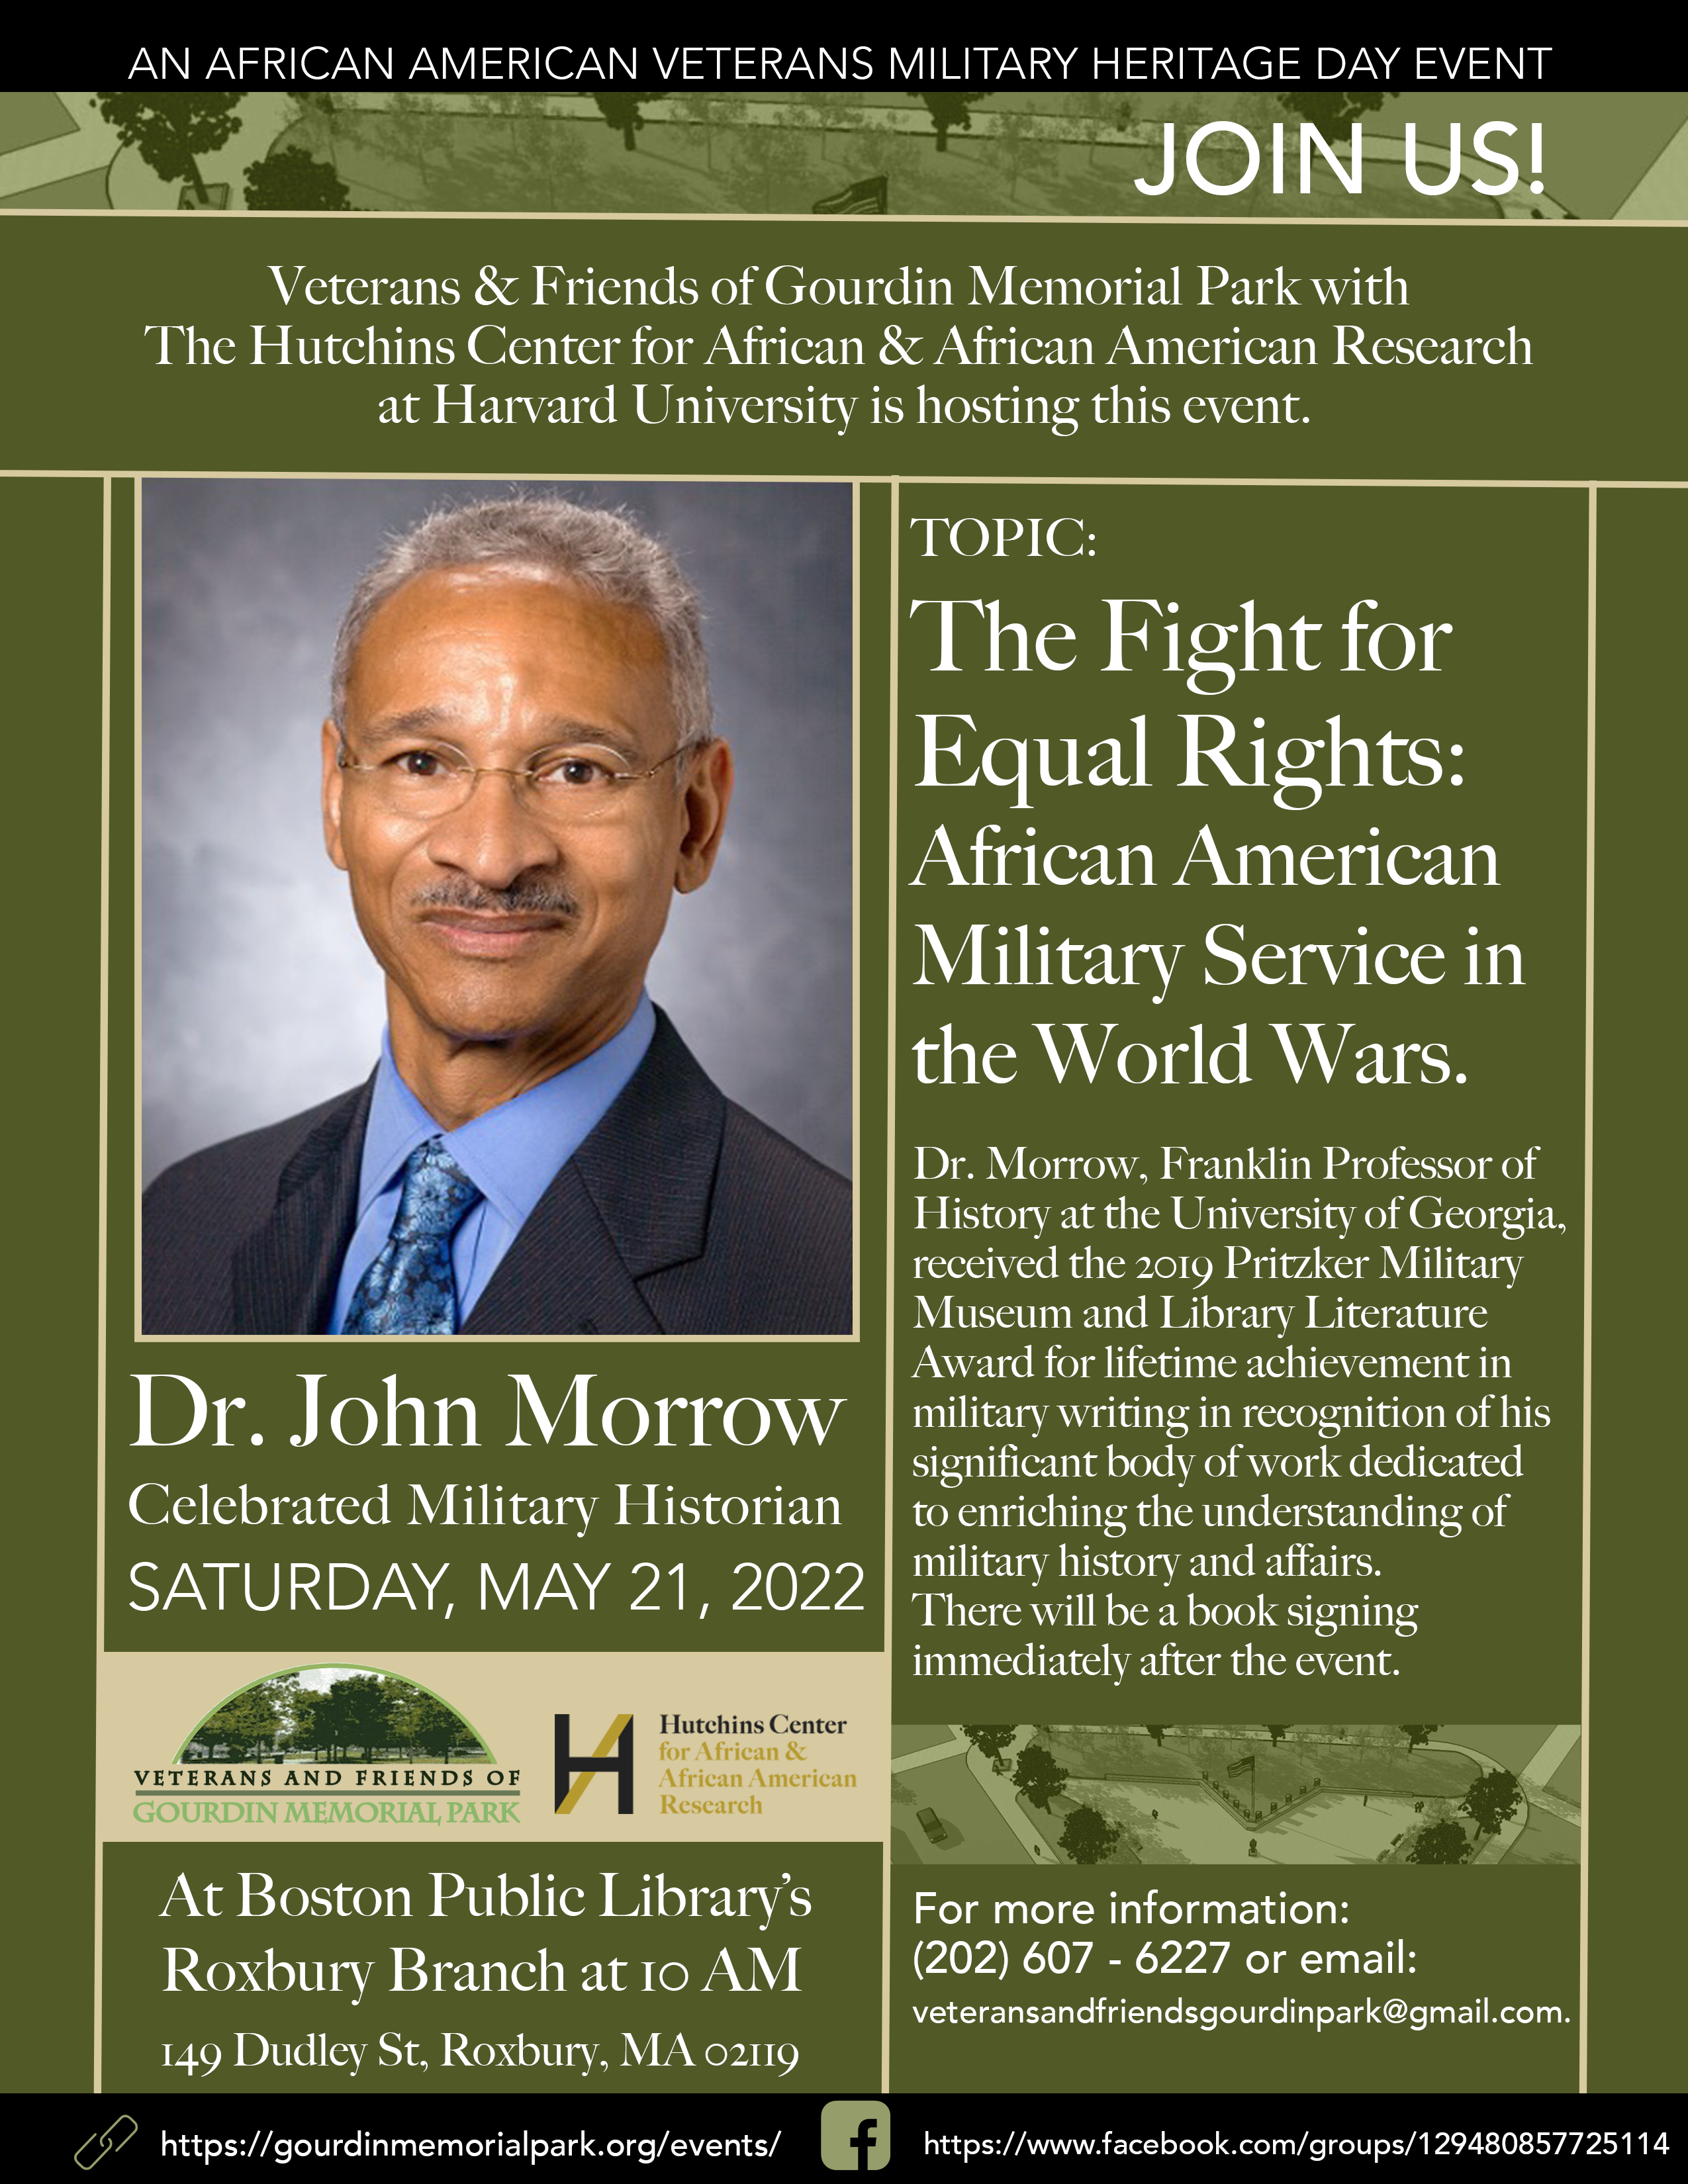 An African American Veterans Military Heritage Day Event